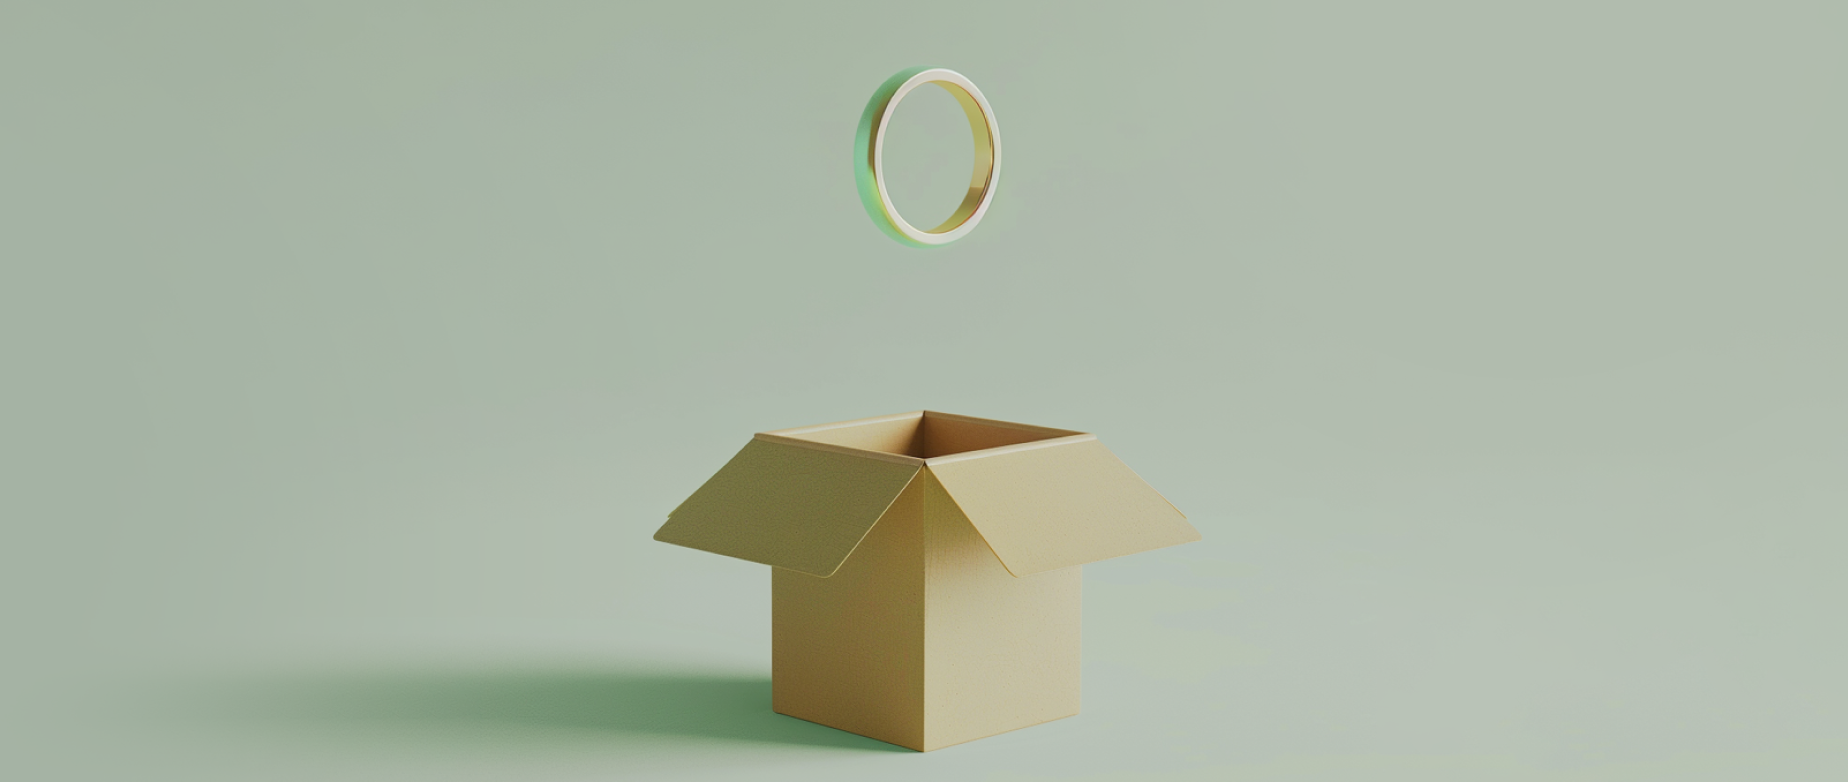 A gold ring above an open cardboard box on a grey green background.